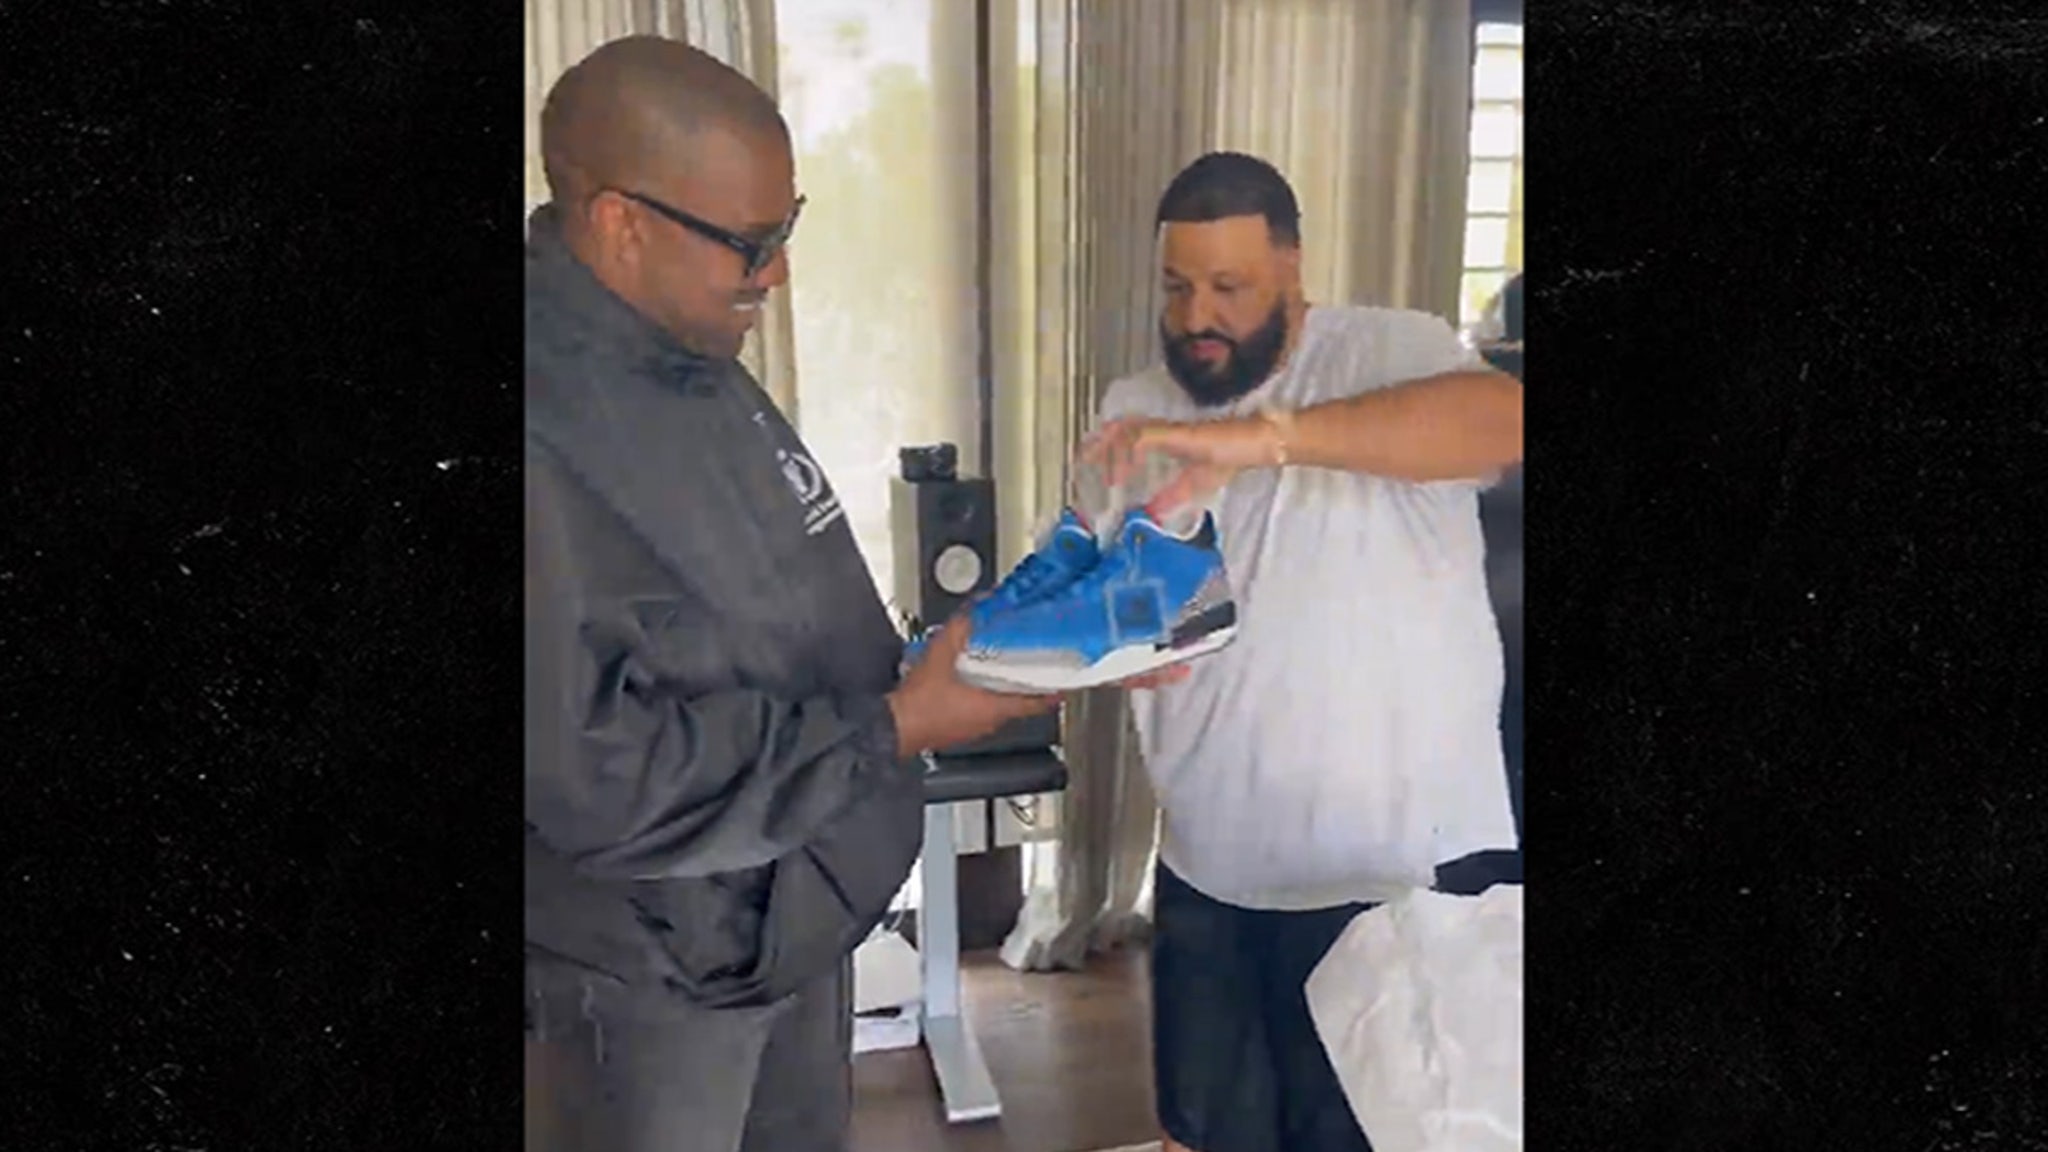 Kanye West gifted a rare pair of Jordan shoes to DJ Khaled during his session thumbnail